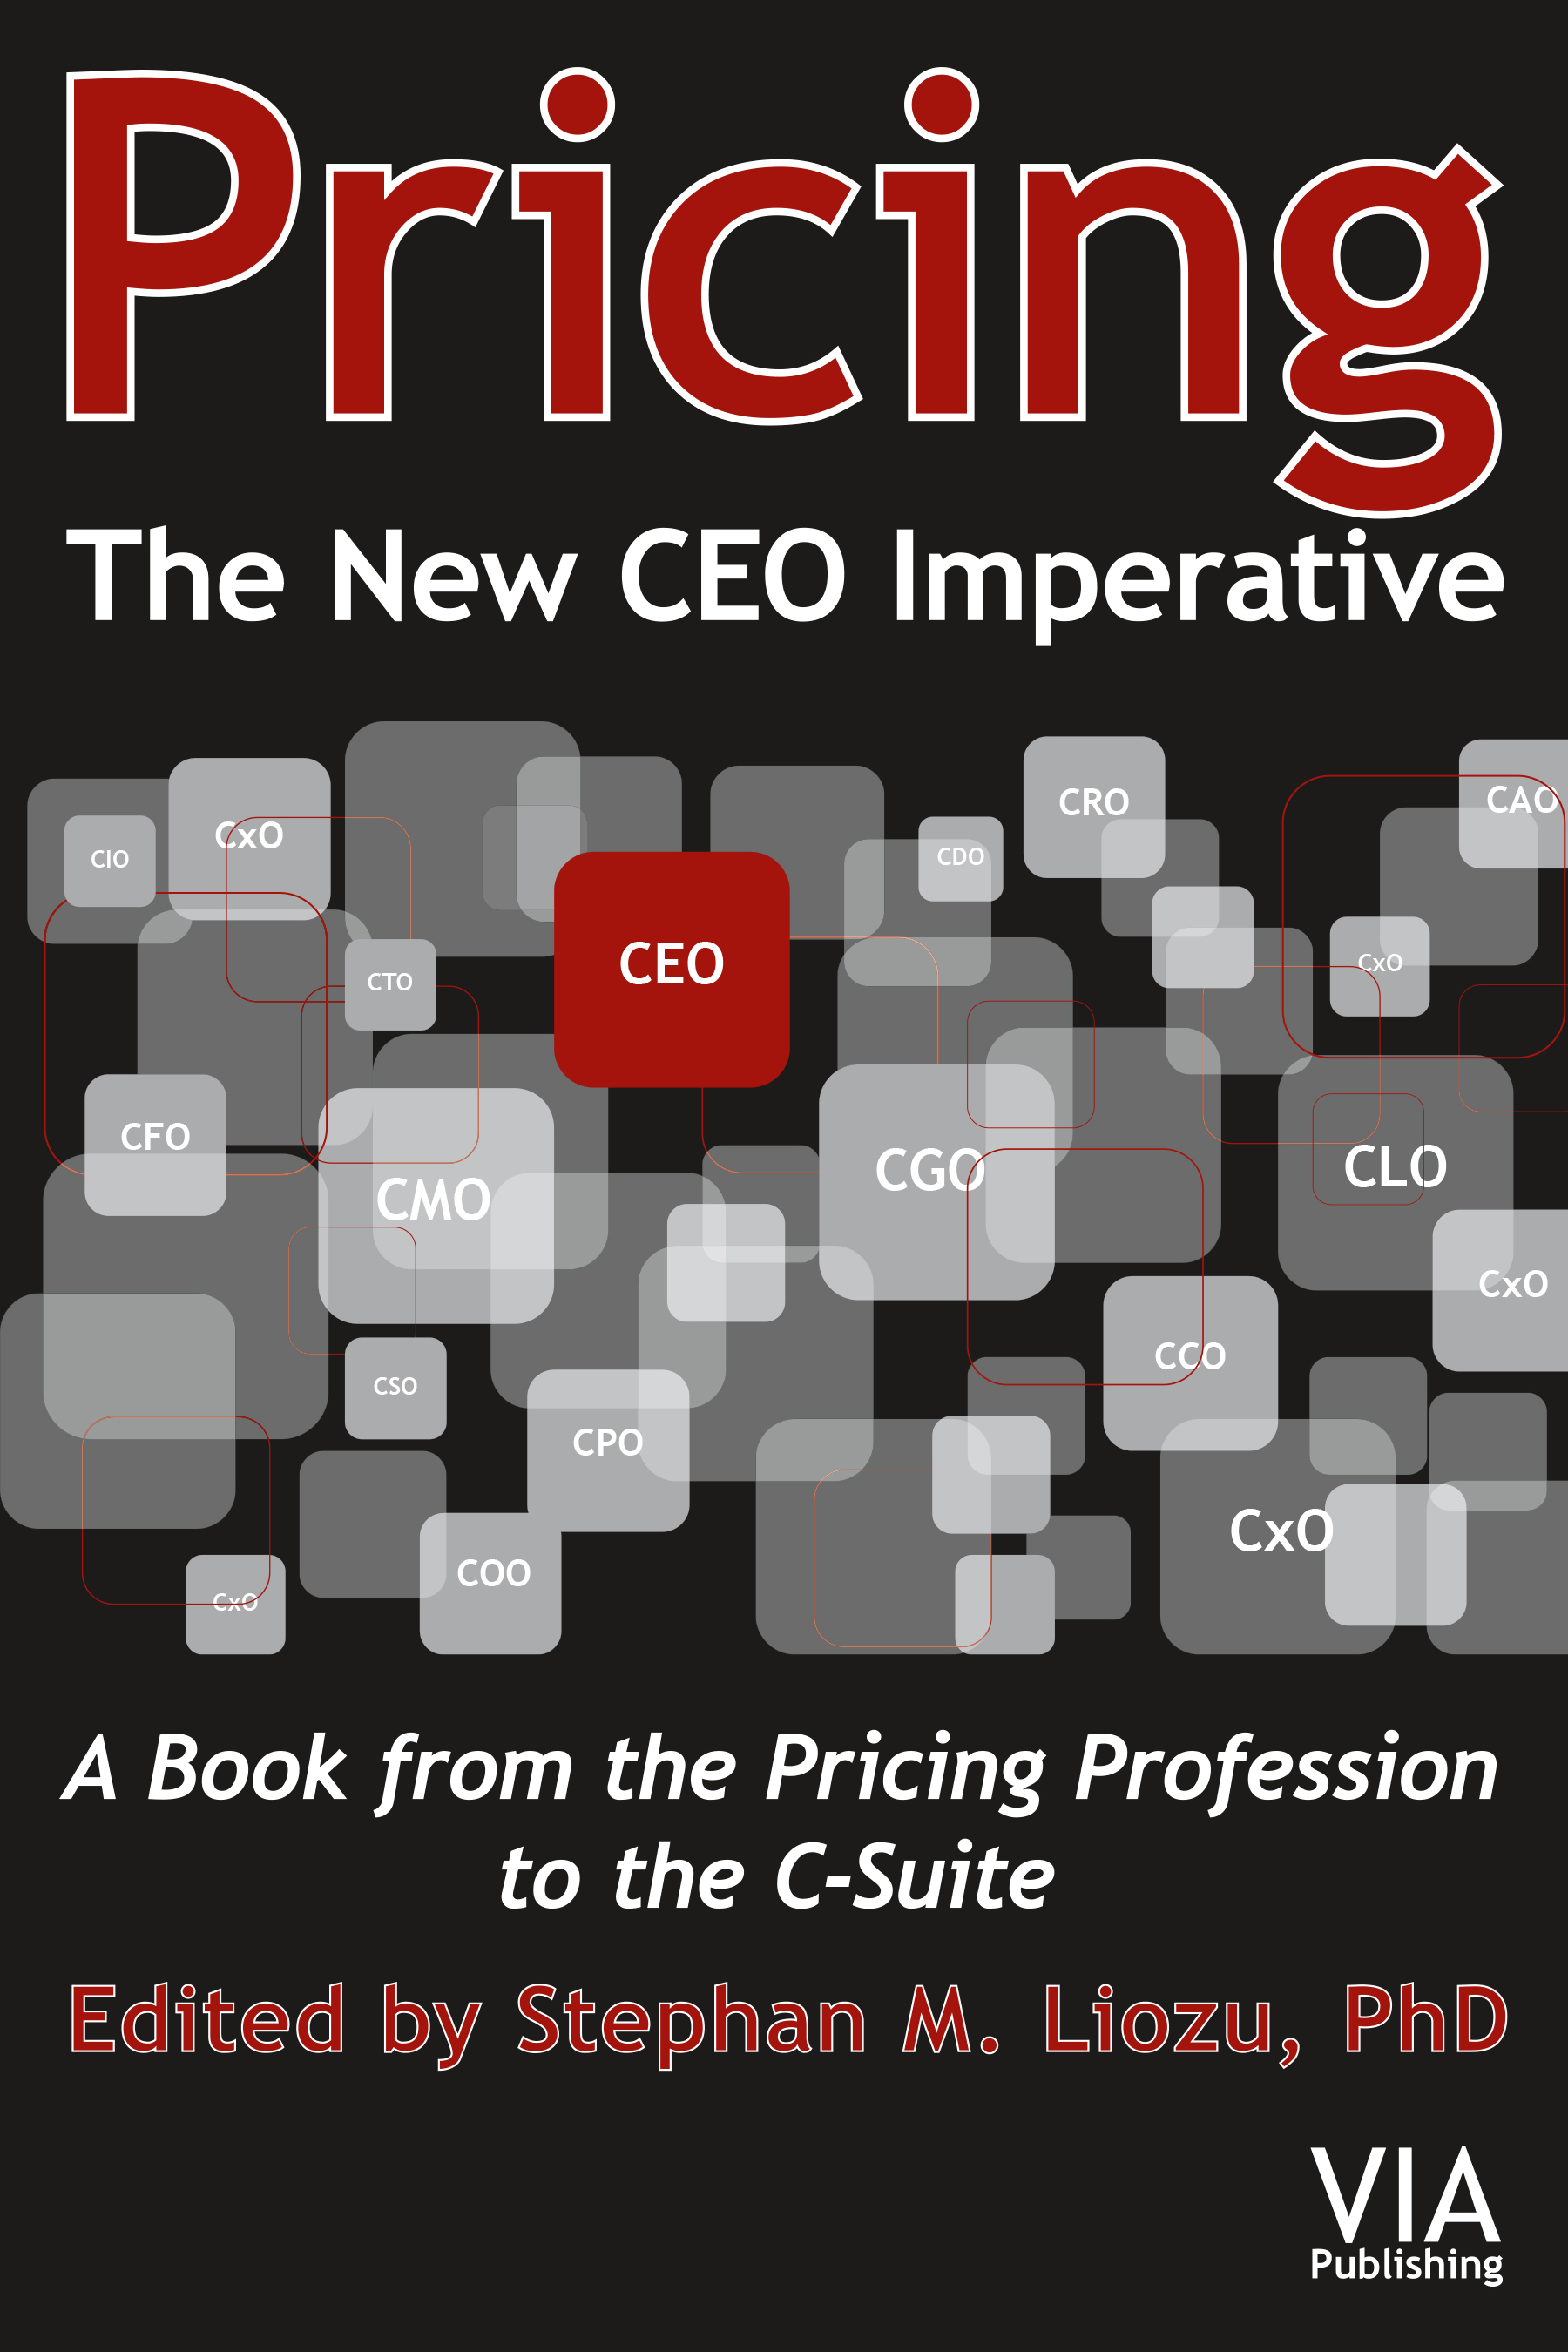 Why Pricing is the New CEO Imperative